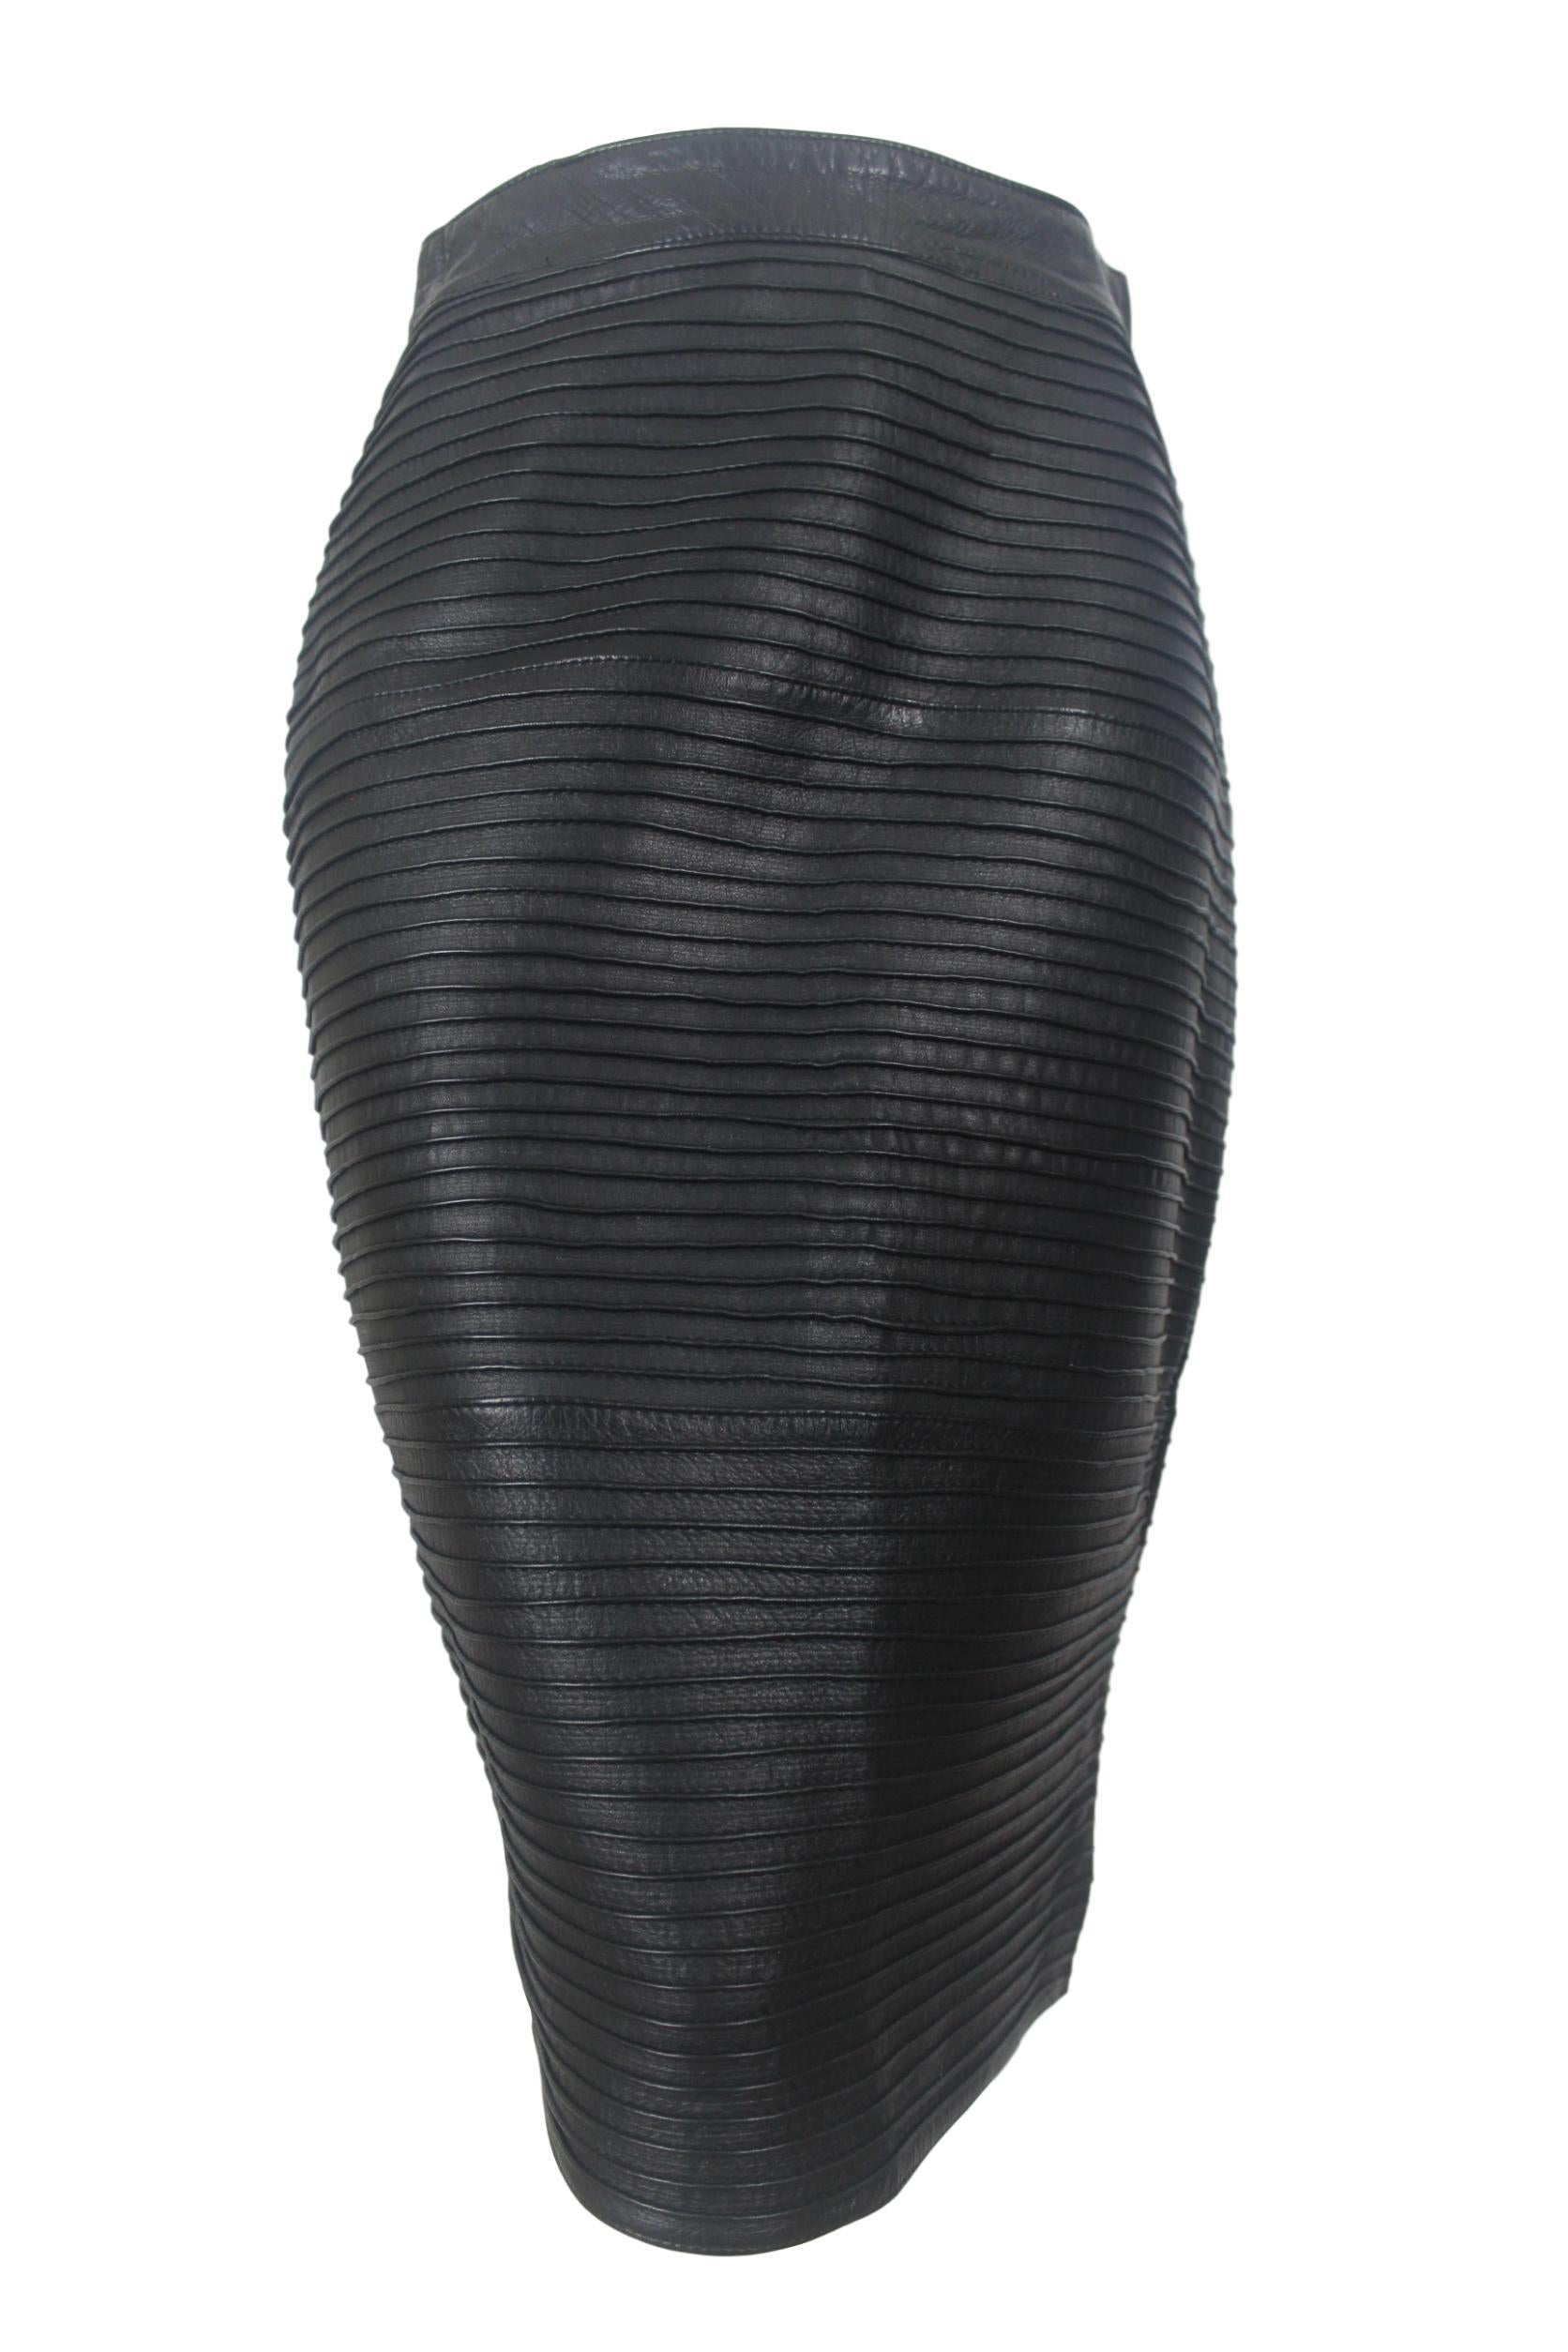 Gianni Versace 1990s Leather Skirt For Sale 3